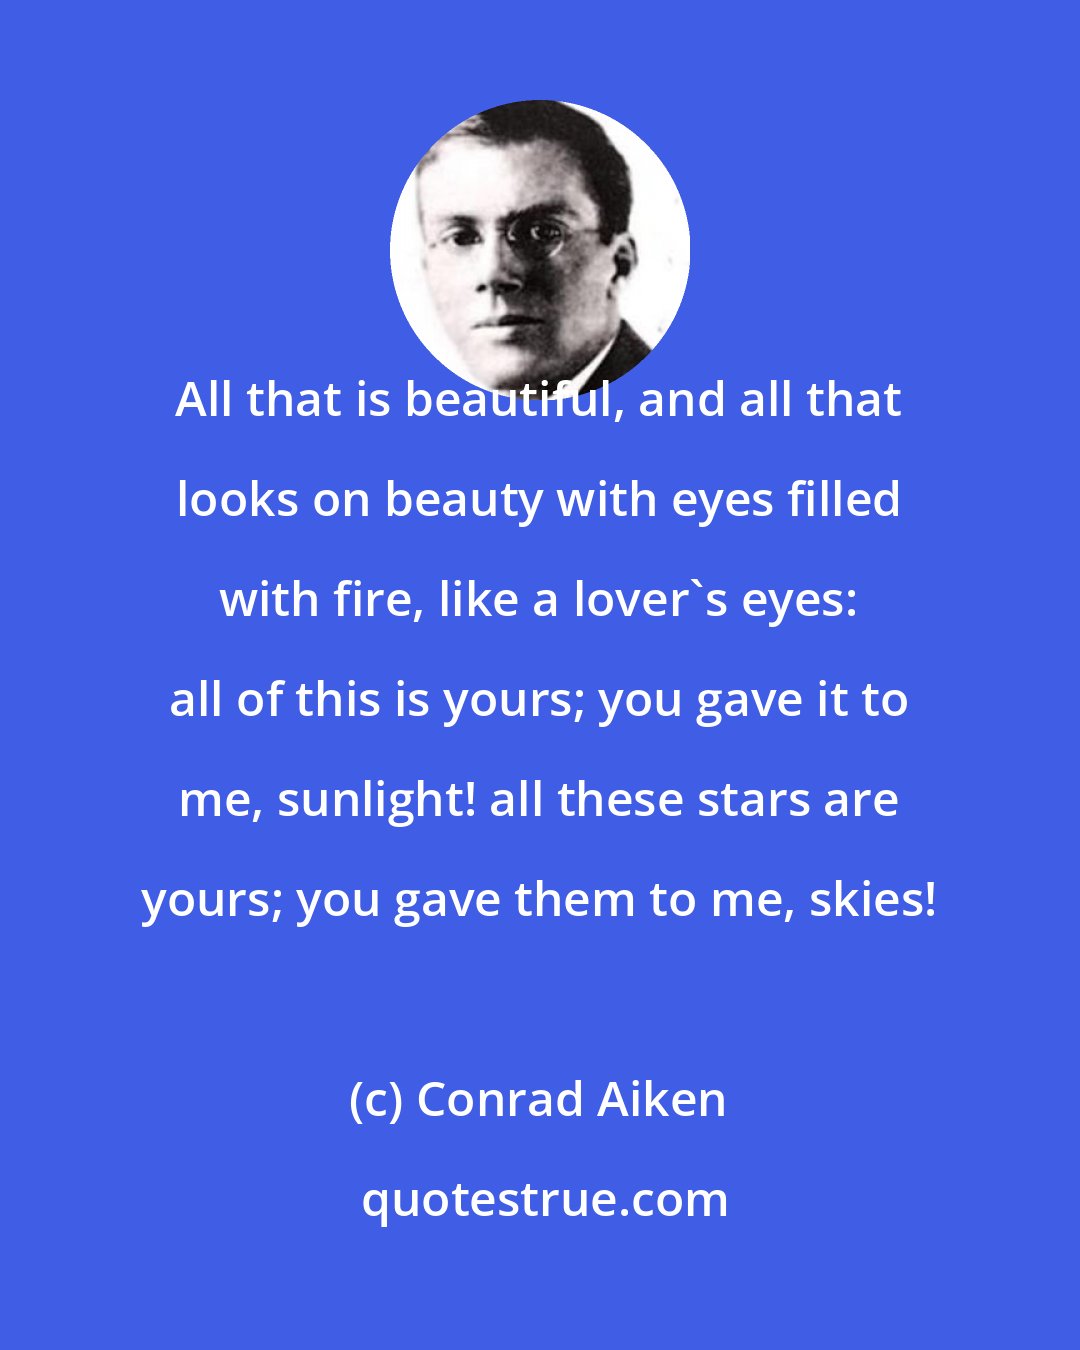 Conrad Aiken: All that is beautiful, and all that looks on beauty with eyes filled with fire, like a lover's eyes: all of this is yours; you gave it to me, sunlight! all these stars are yours; you gave them to me, skies!